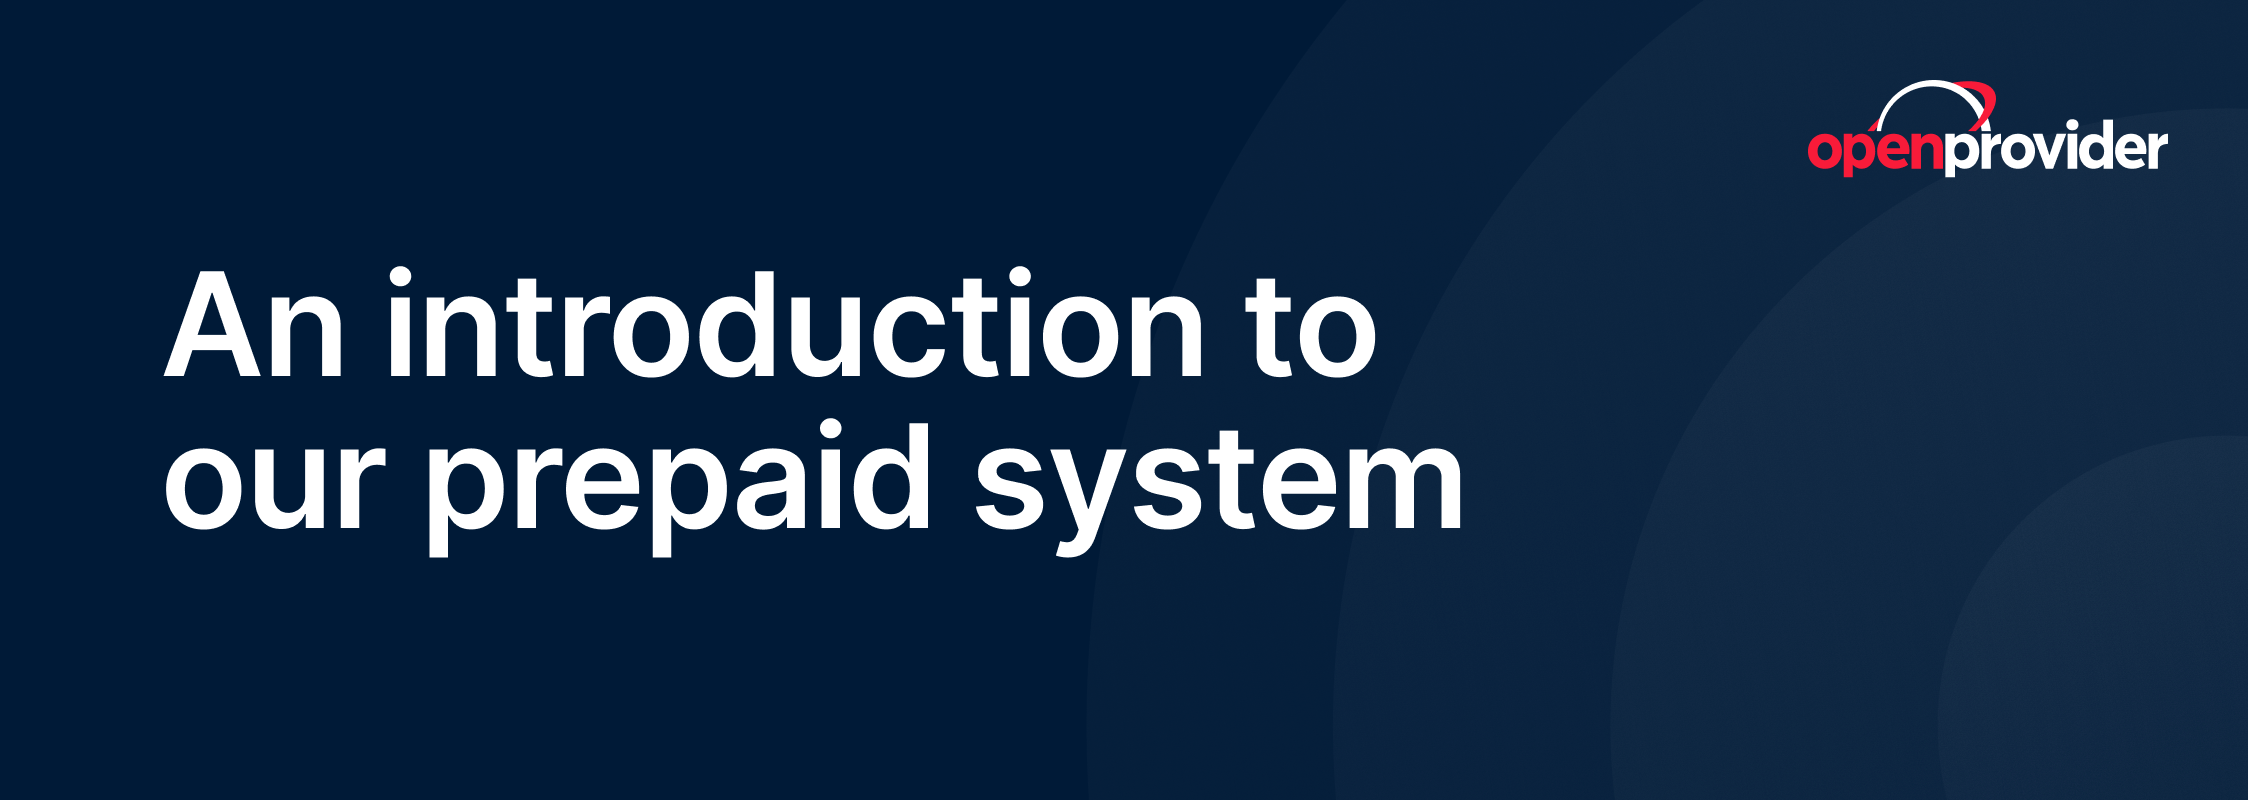 introduction to openprovider's prepaid system